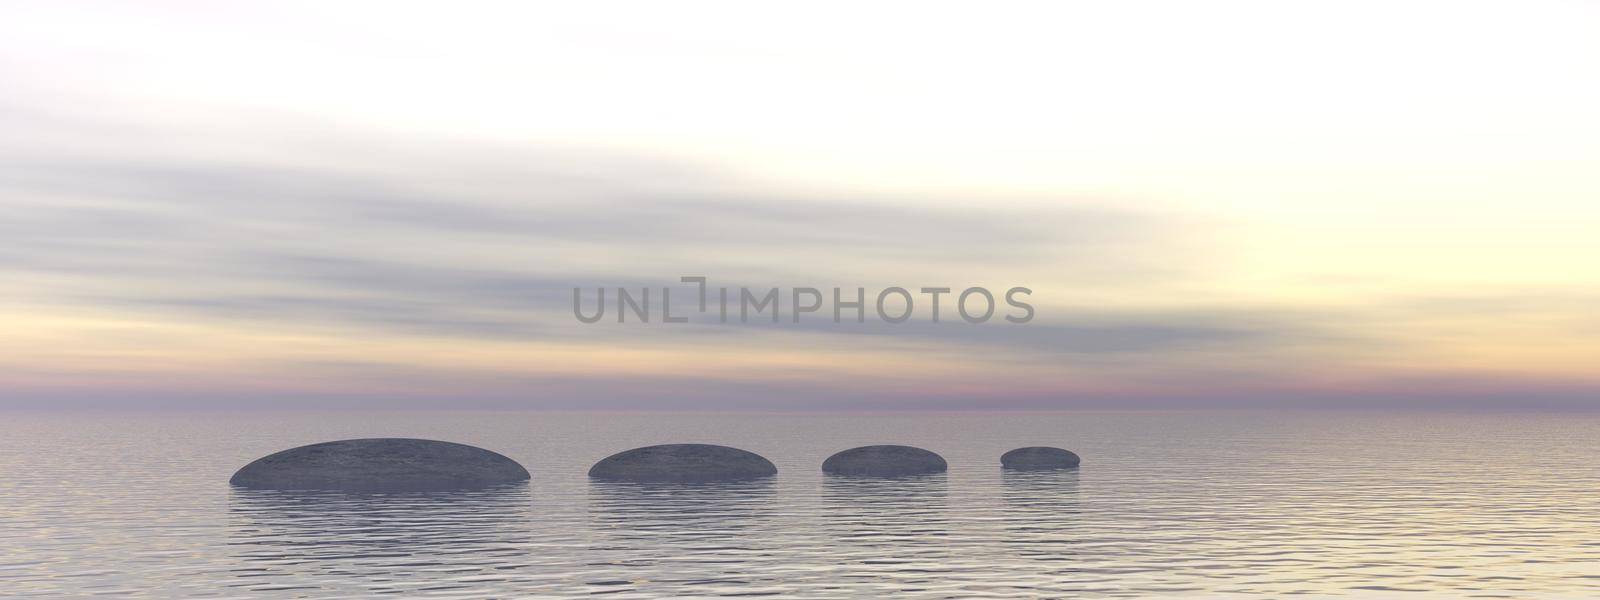 beautiful meditation landscape on the ocean and stone - 3d rendering